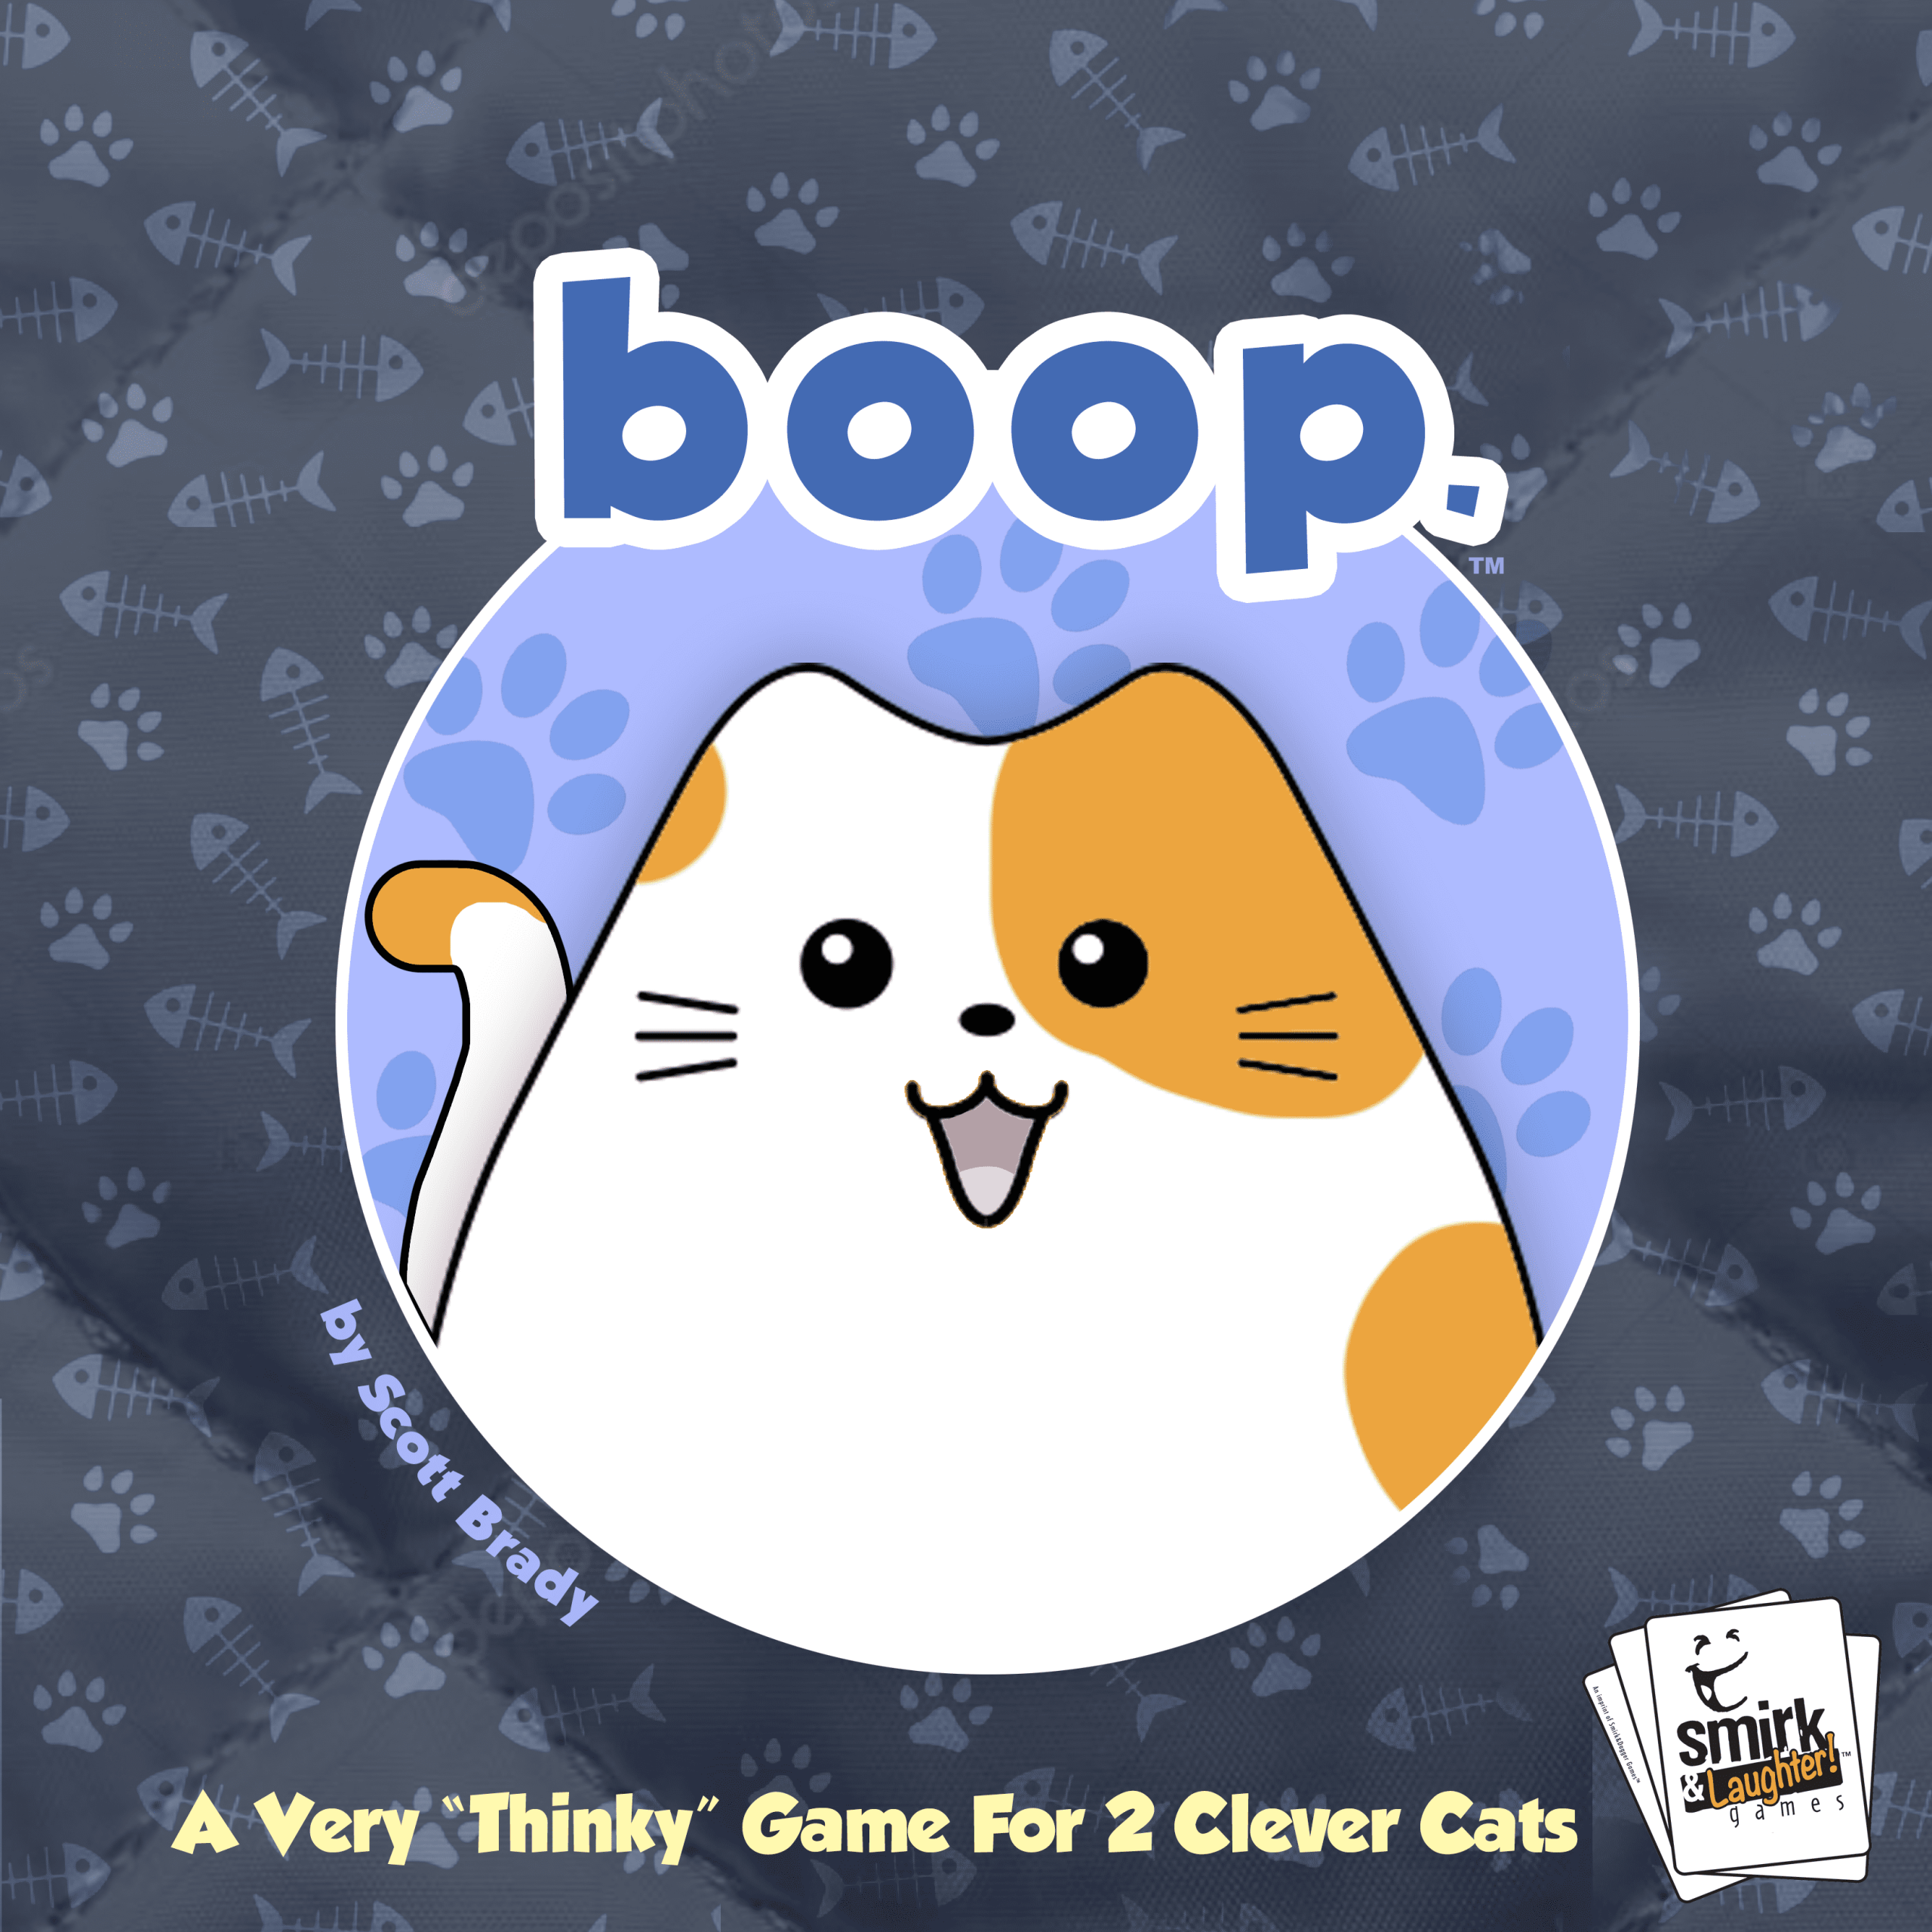 Buy boop. only at Bored Game Company.